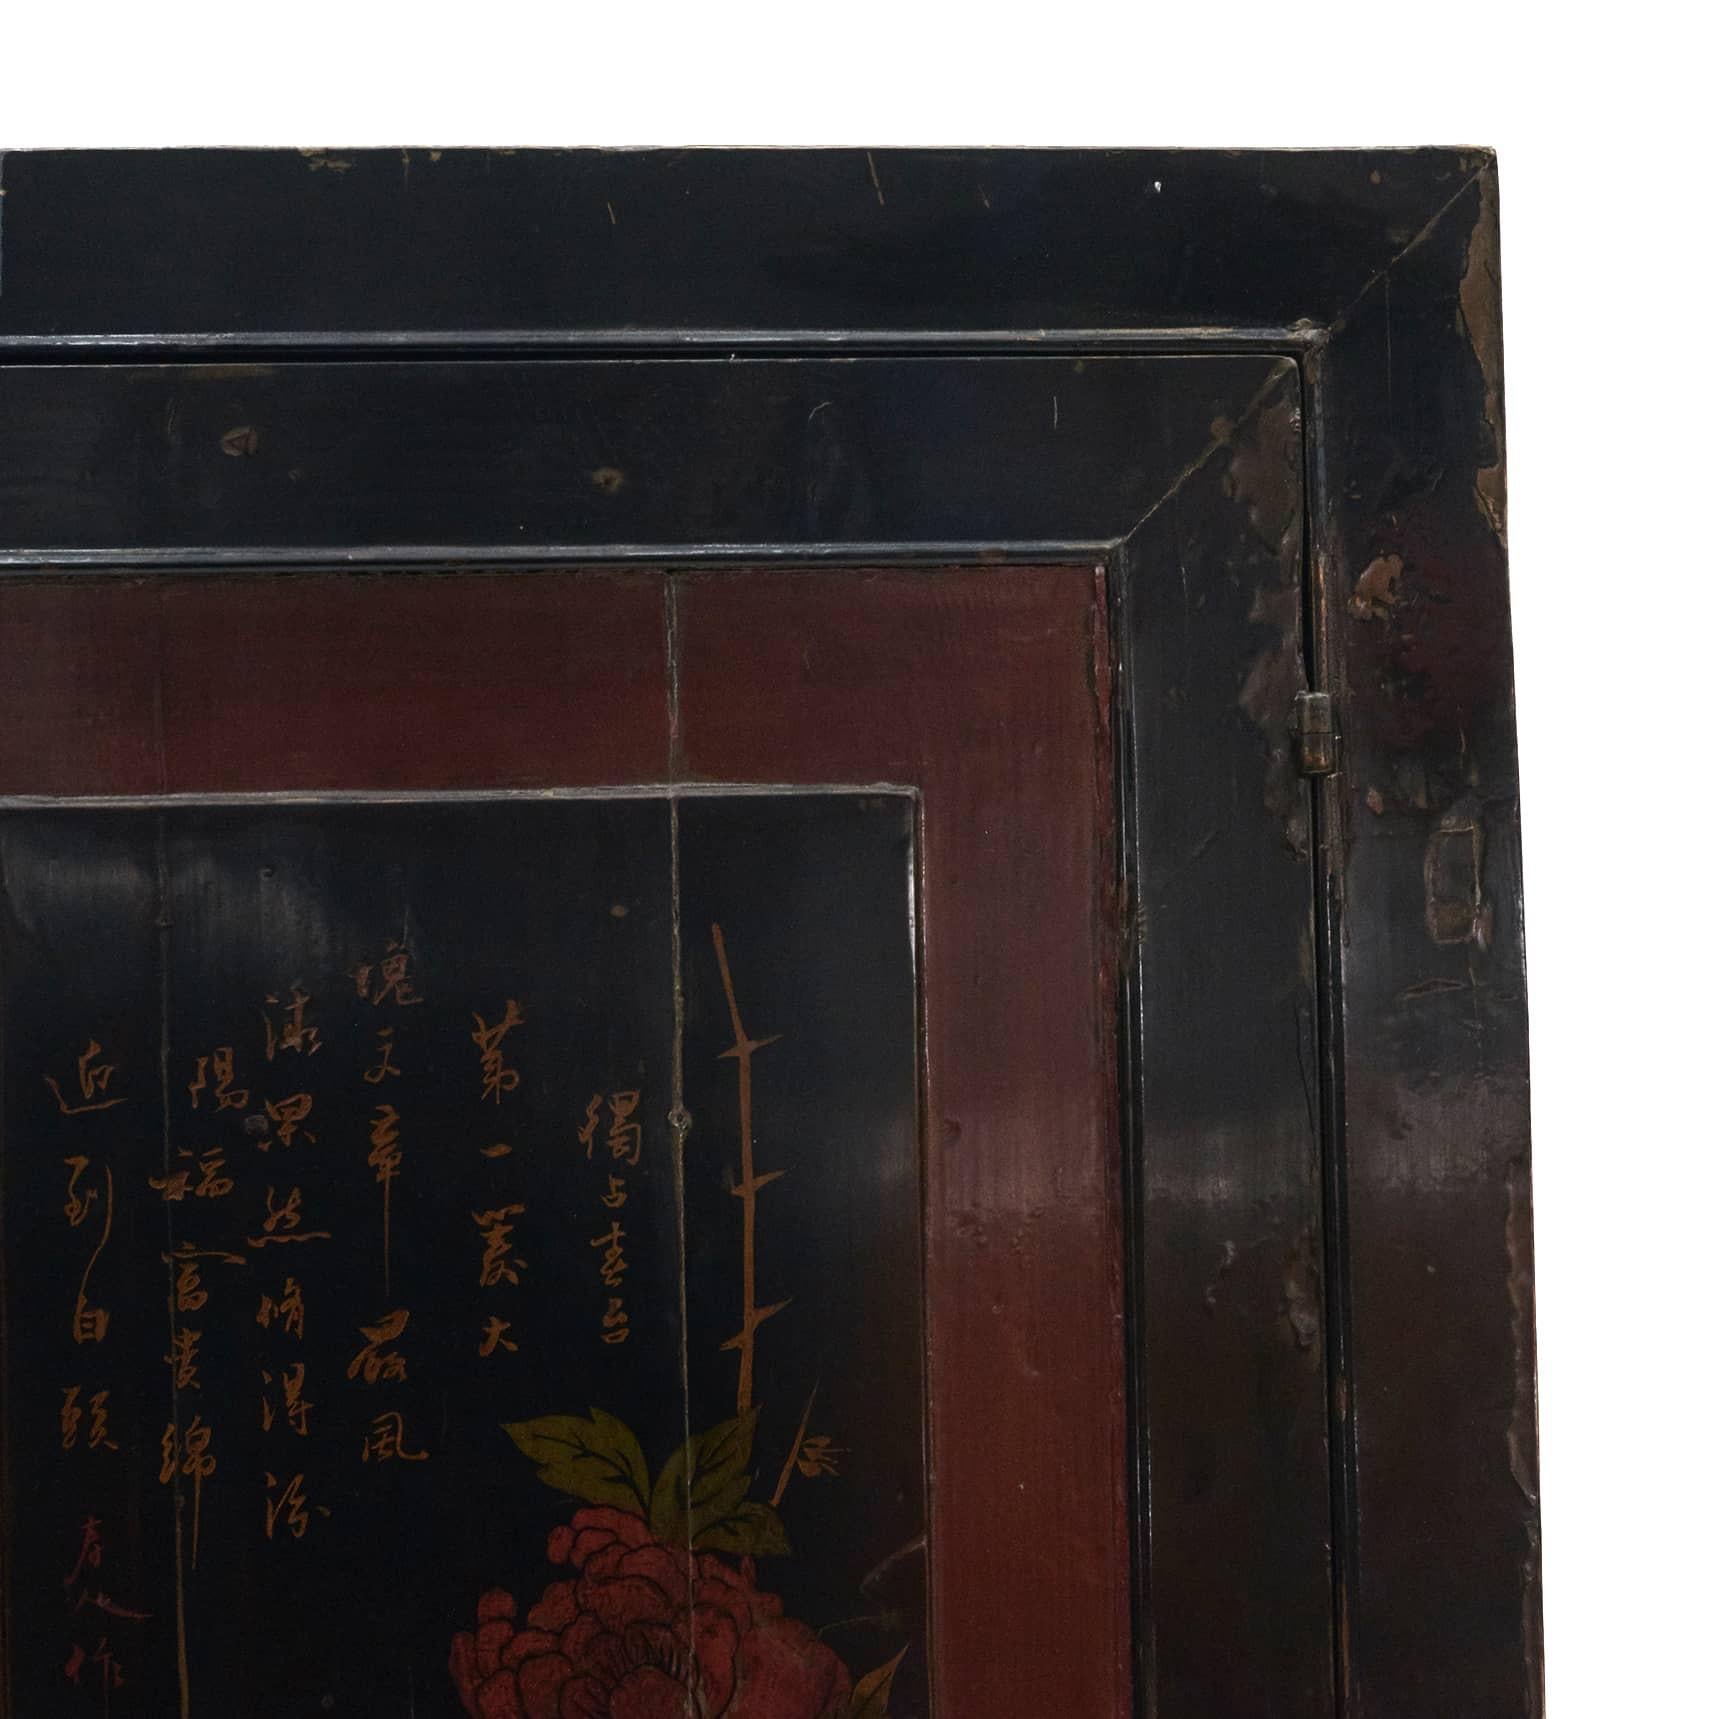 19th Century Original Decorated Cabinet, from Fujian Province 1860 - 1880 For Sale